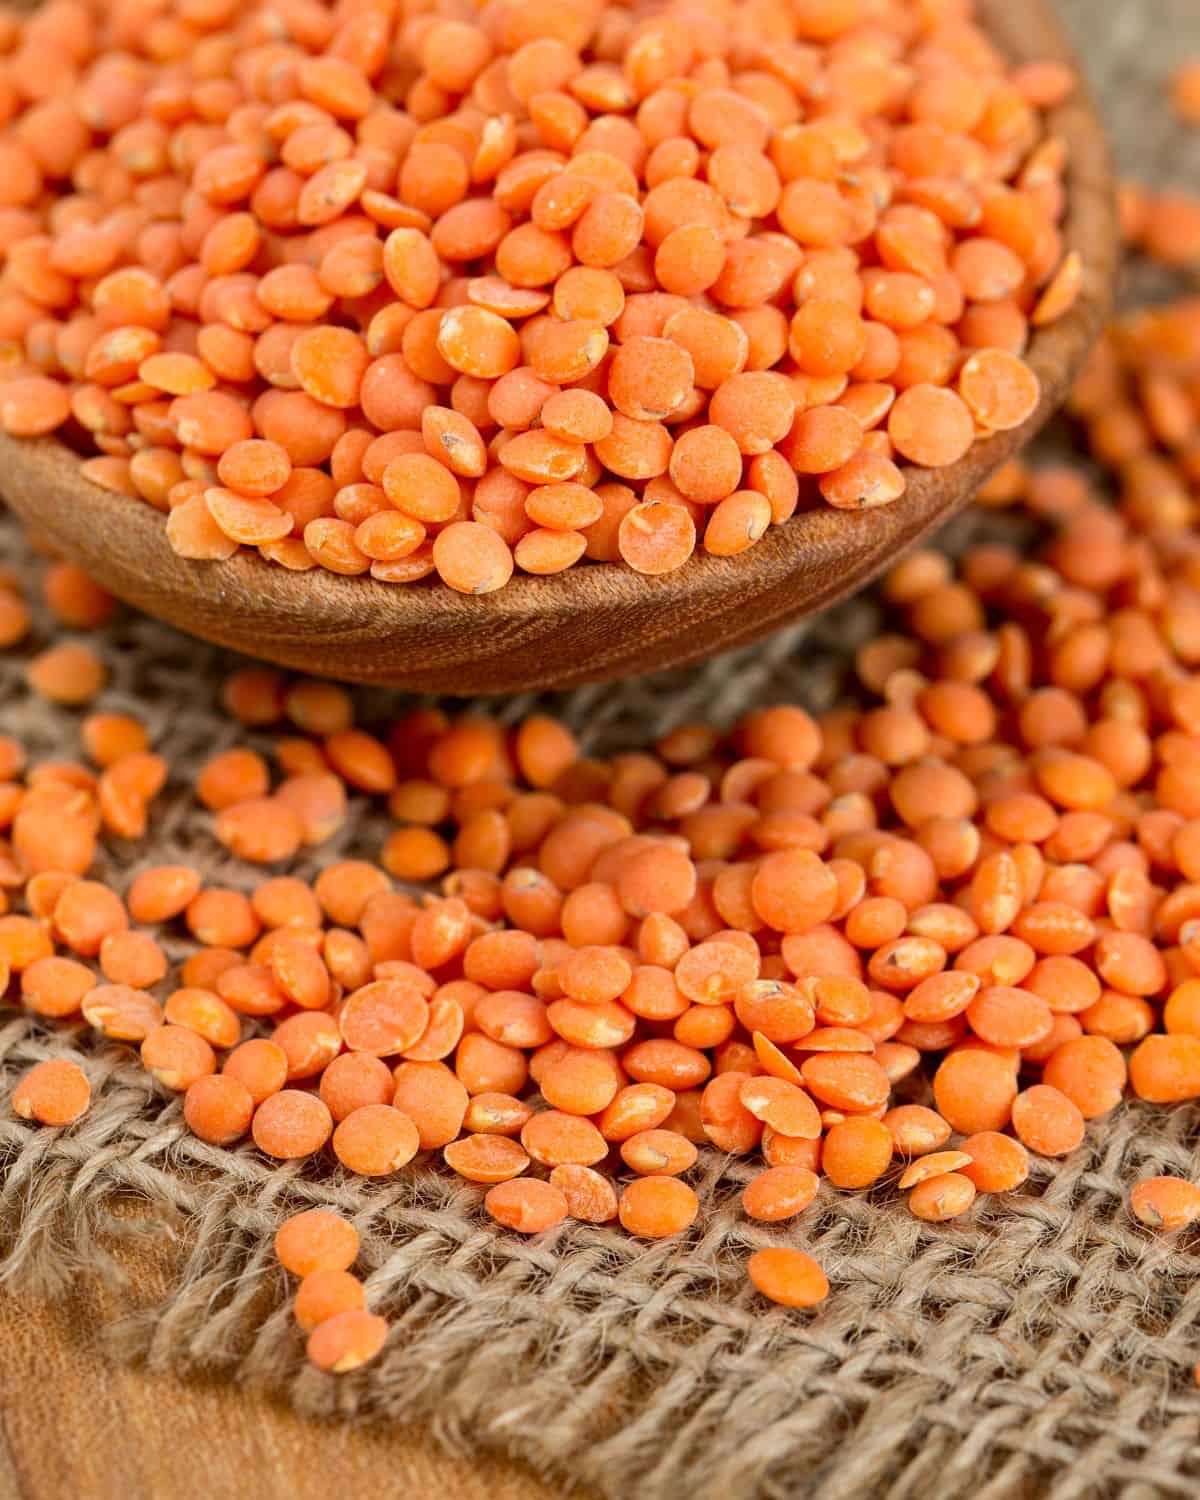 Whole red lentils are placed in a wooden bowl. The bowl is placed on a piece of burlap. Some of the lentils have spilled on the burlap.